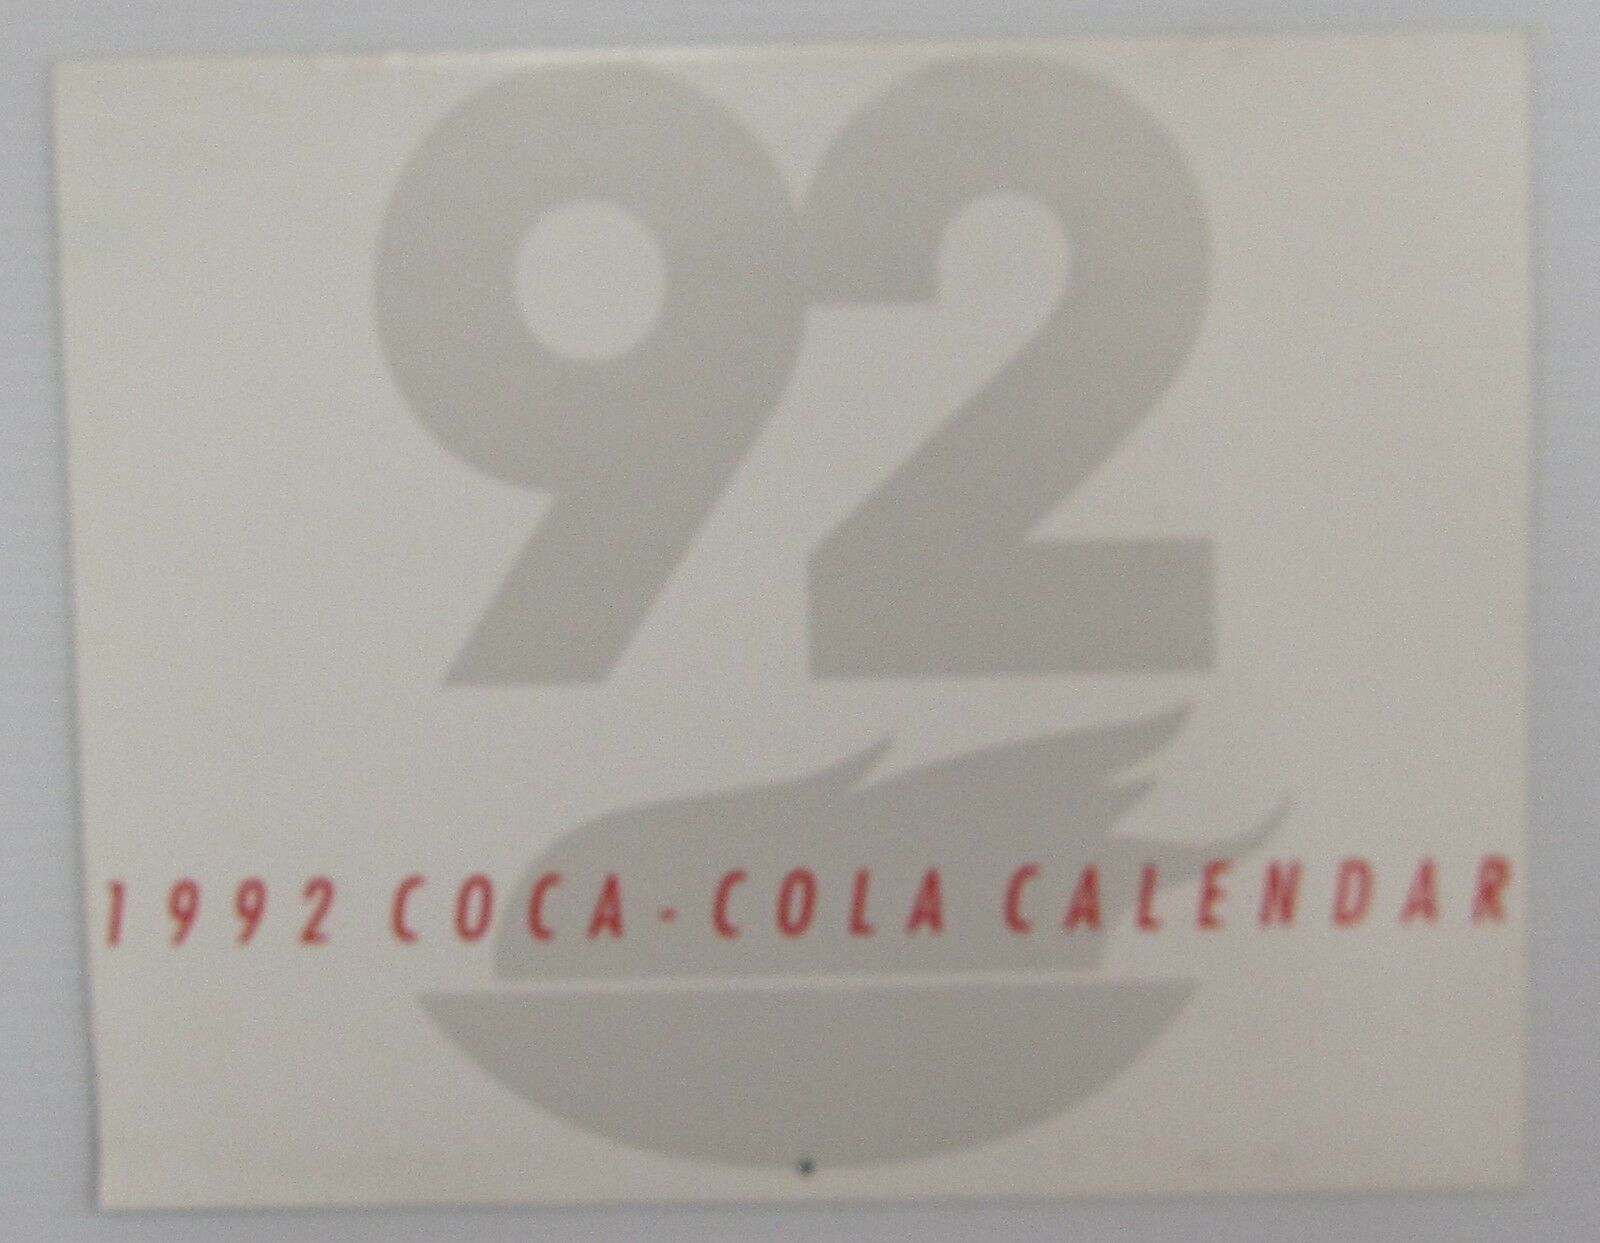 Primary image for Coca-Cola 1992 Calendar - NEW  FREE SHIPPING